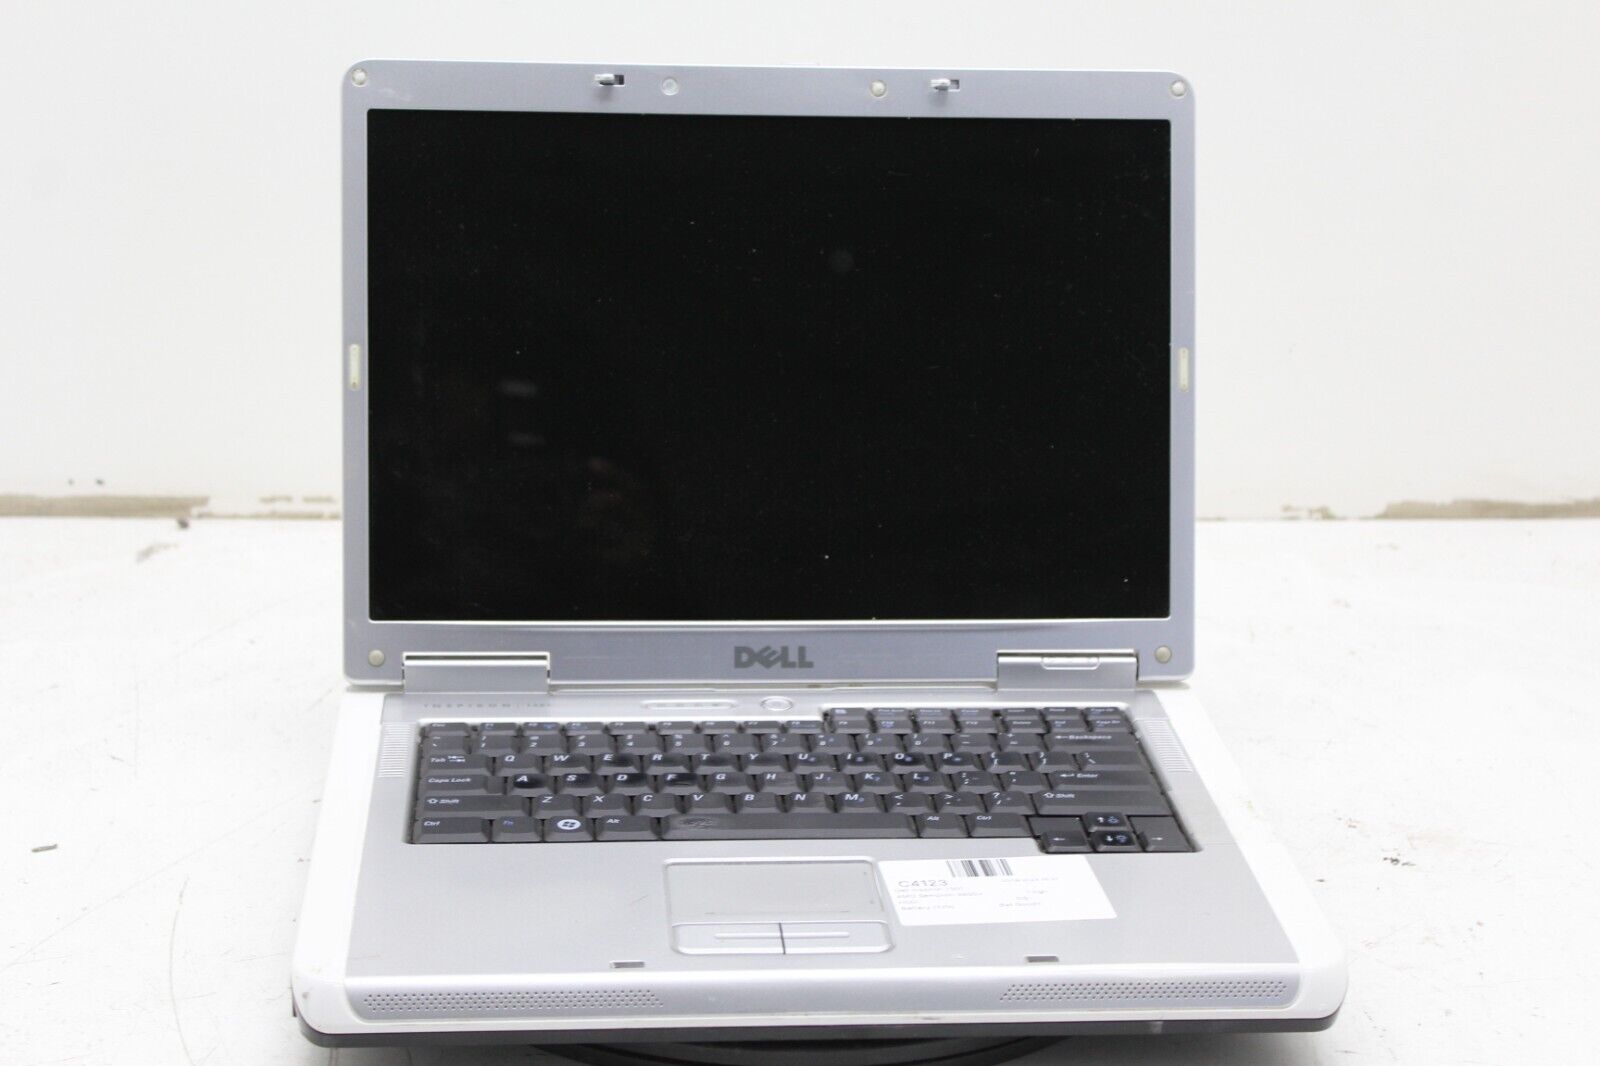 Dell Inspiron 1501 Laptop AMD Sempron 1.5GB Ram No HDD or Battery